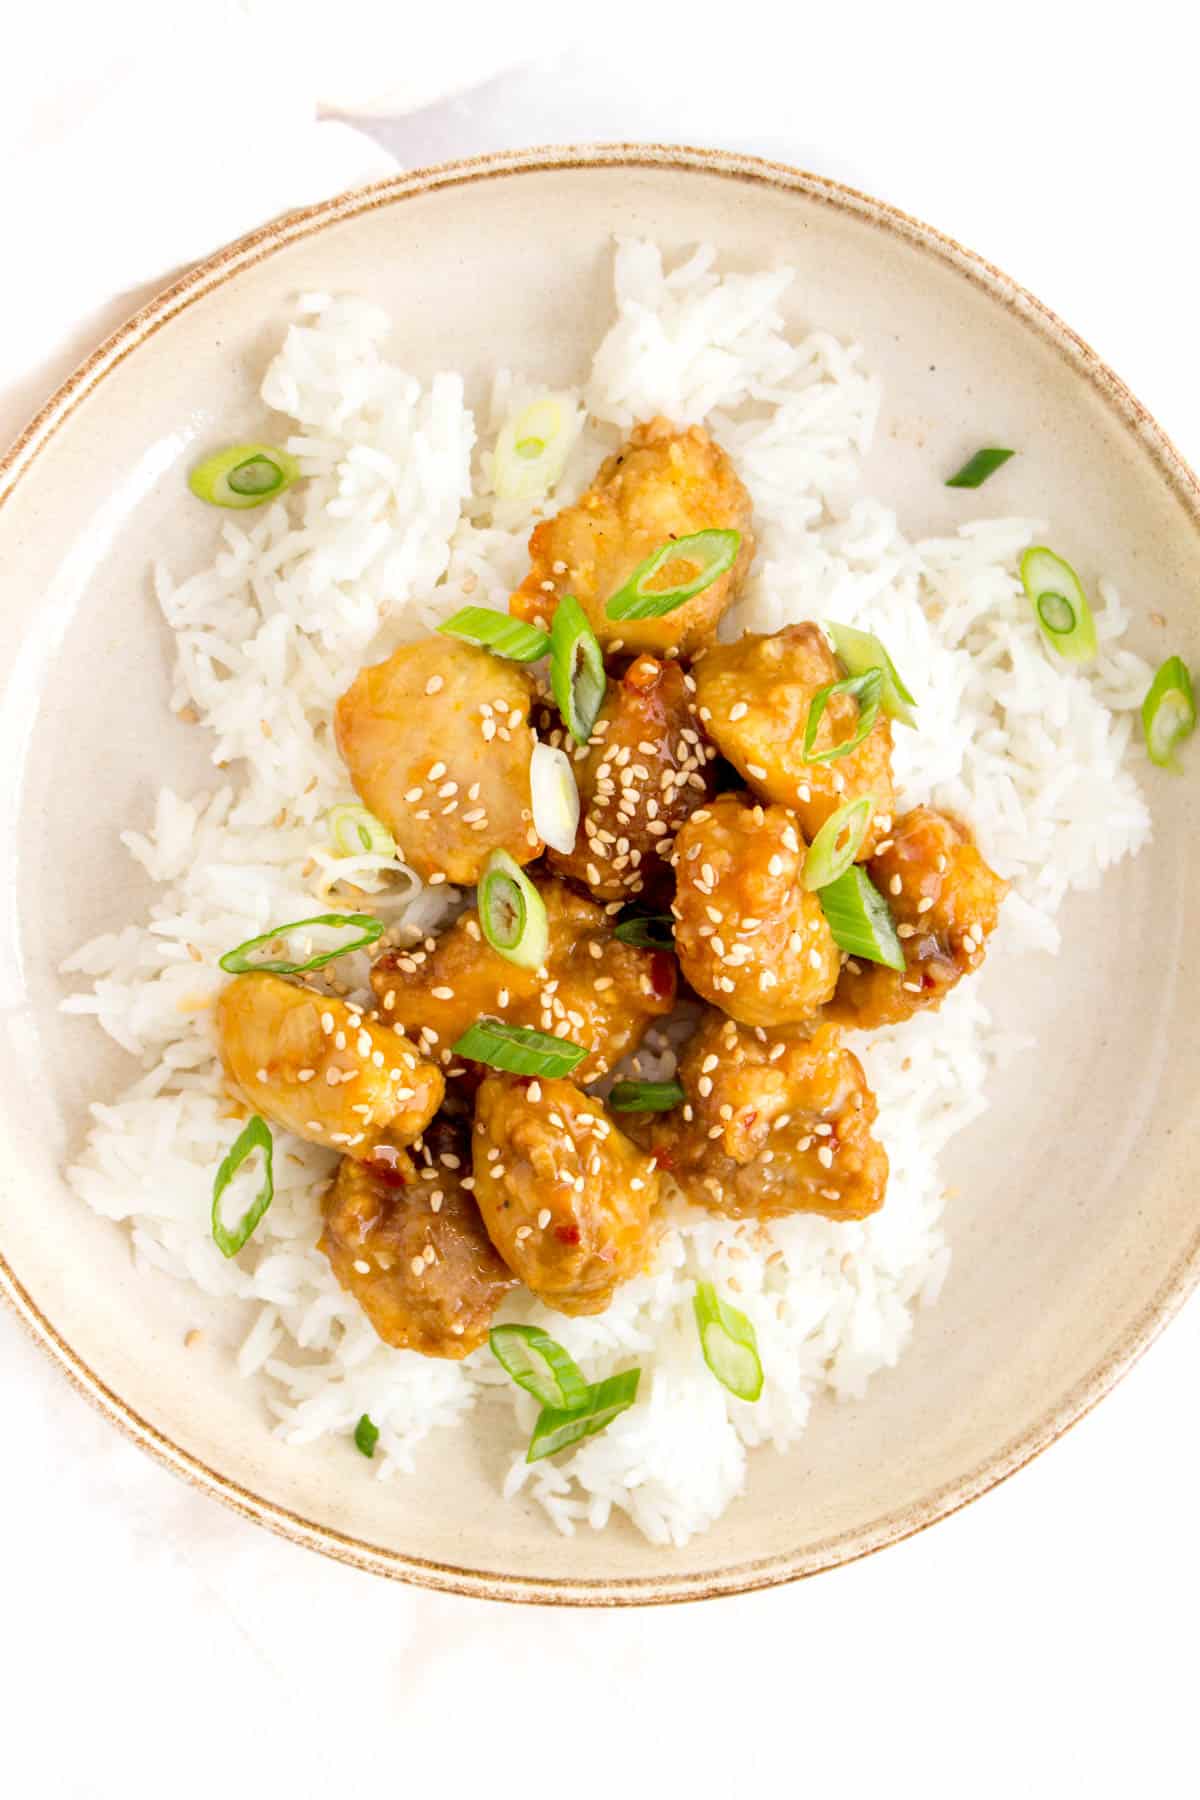 A plate of rice with air fryer orange chicken on top. Garnished with sesame seeds and green onion.